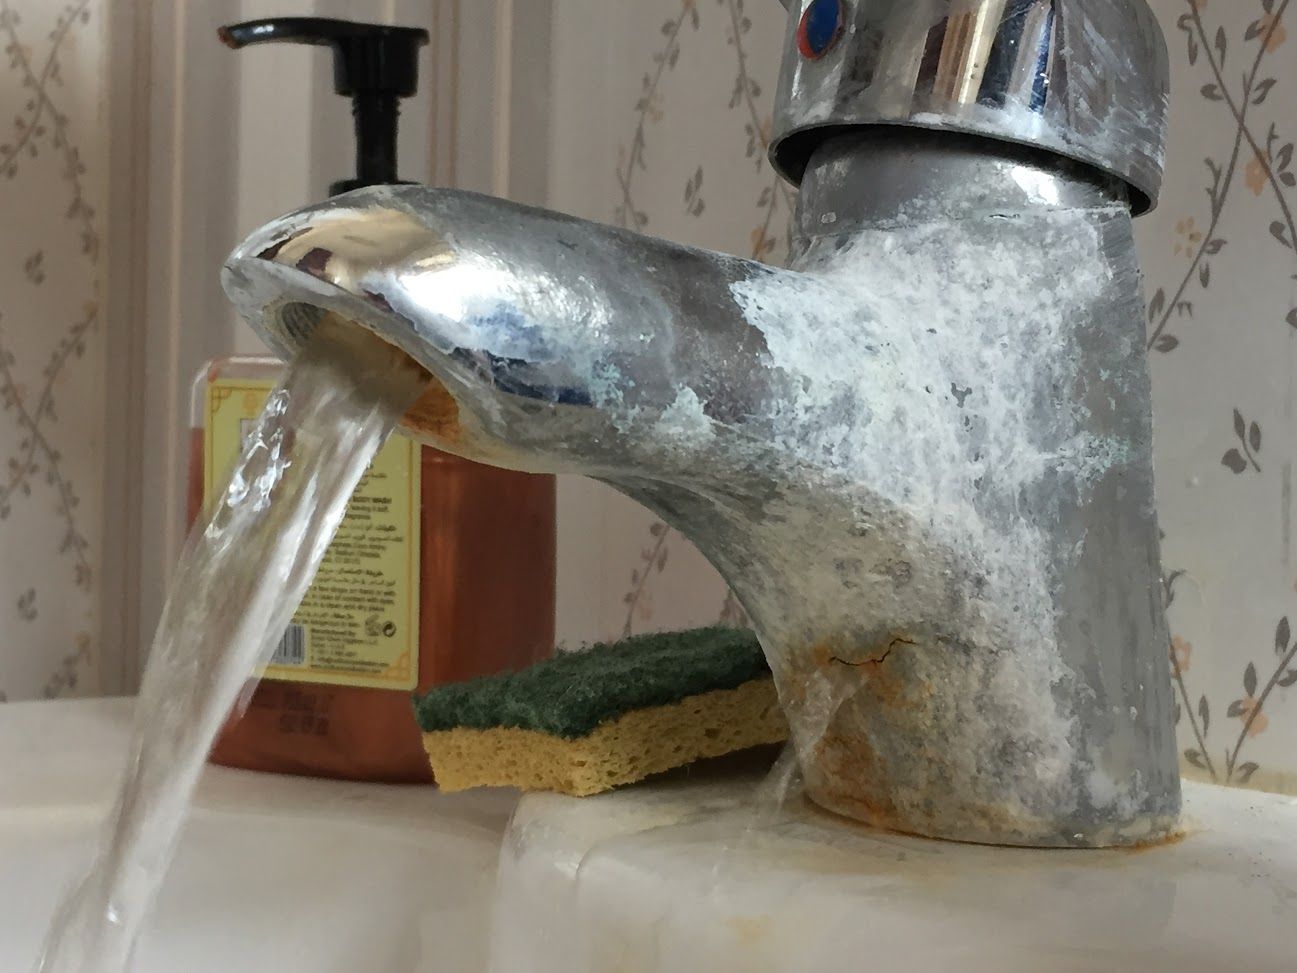 corroded faucet and or tap